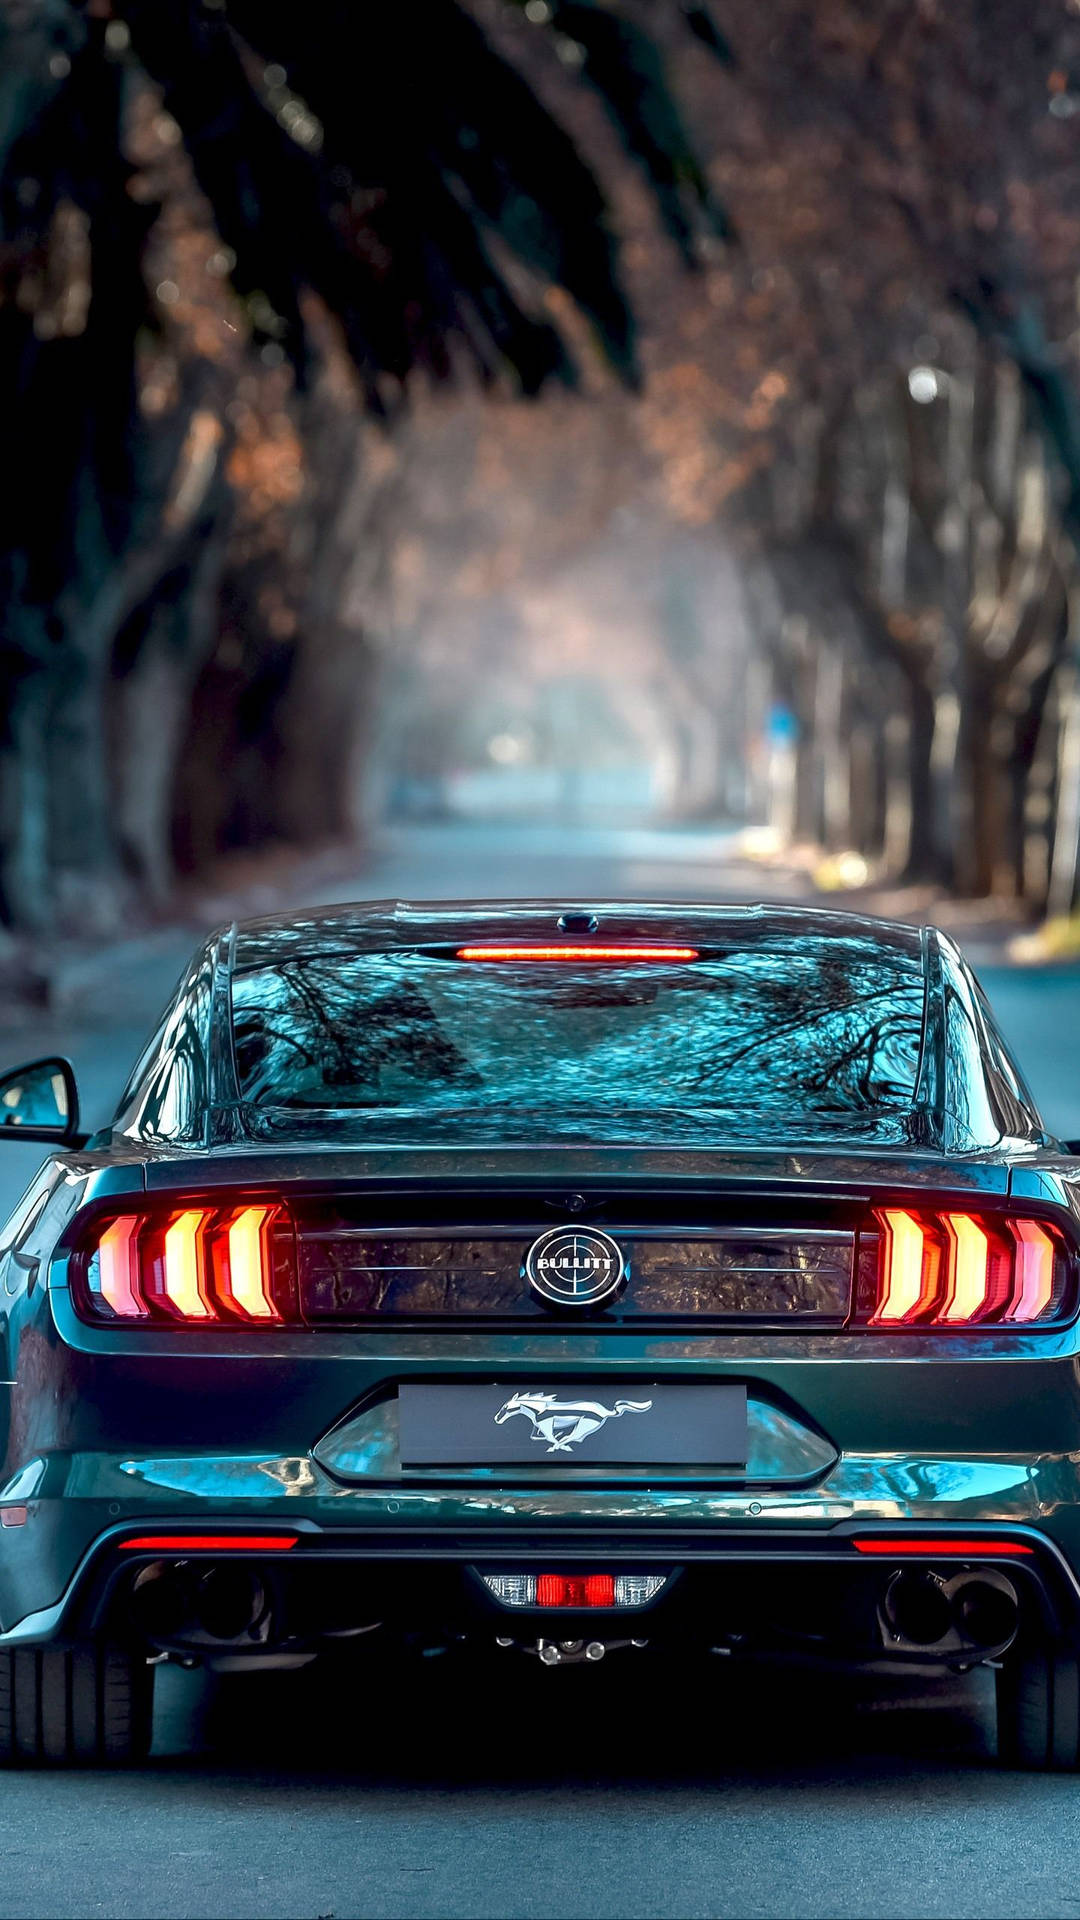 Iphonex Auto Ford Mustang Wallpaper